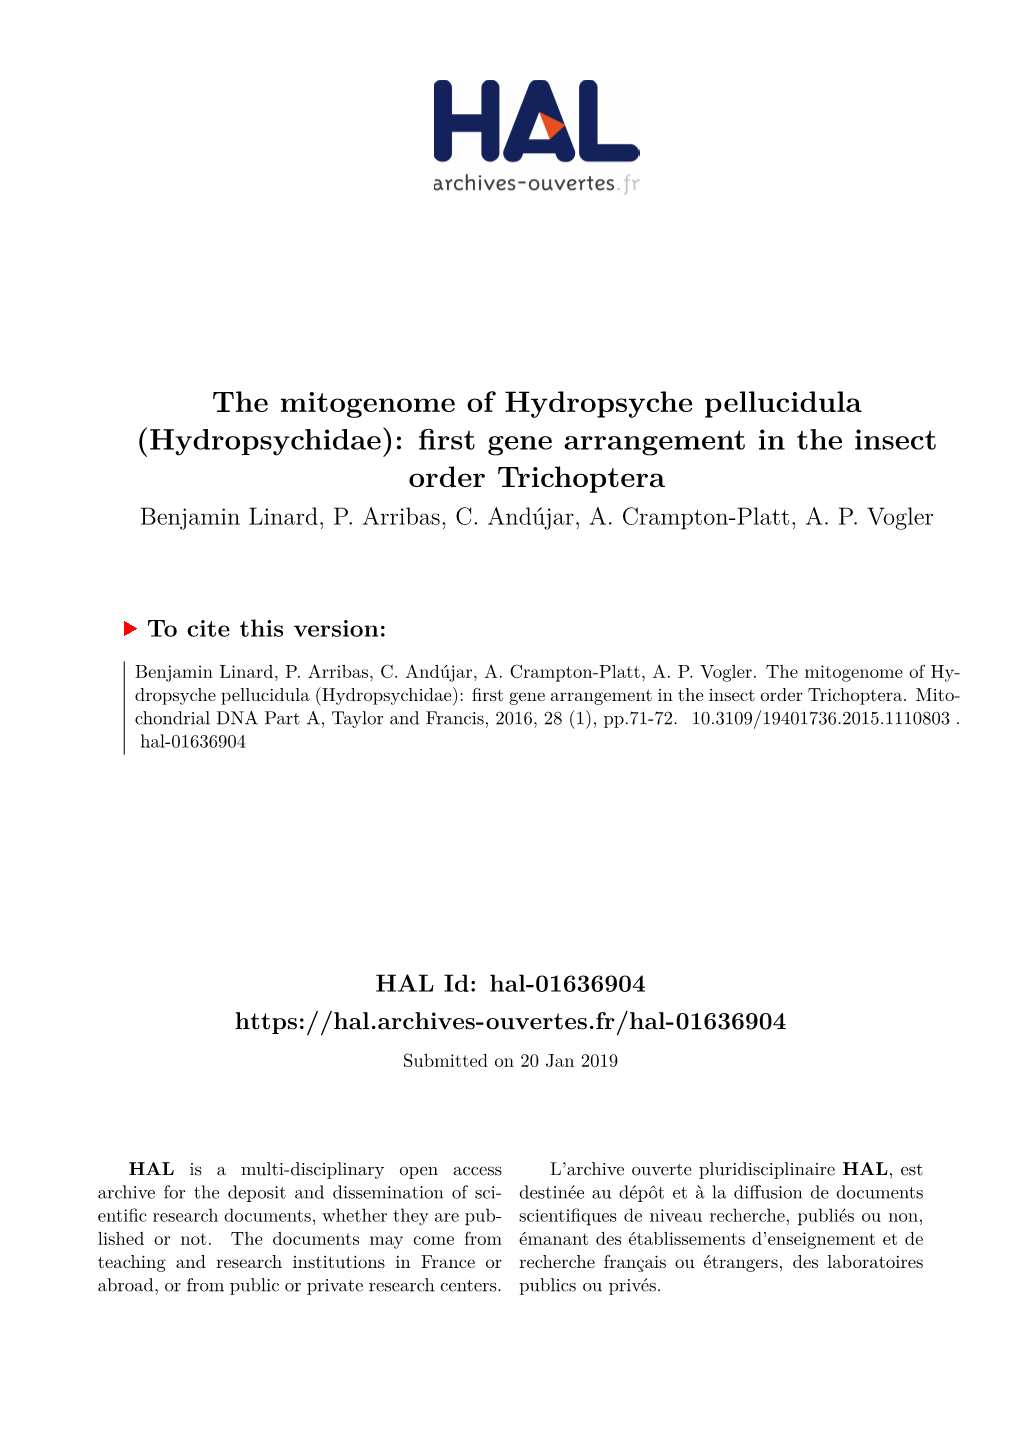 The Mitogenome of Hydropsyche Pellucidula (Hydropsychidae): First Gene Arrangement in the Insect Order Trichoptera Benjamin Linard, P